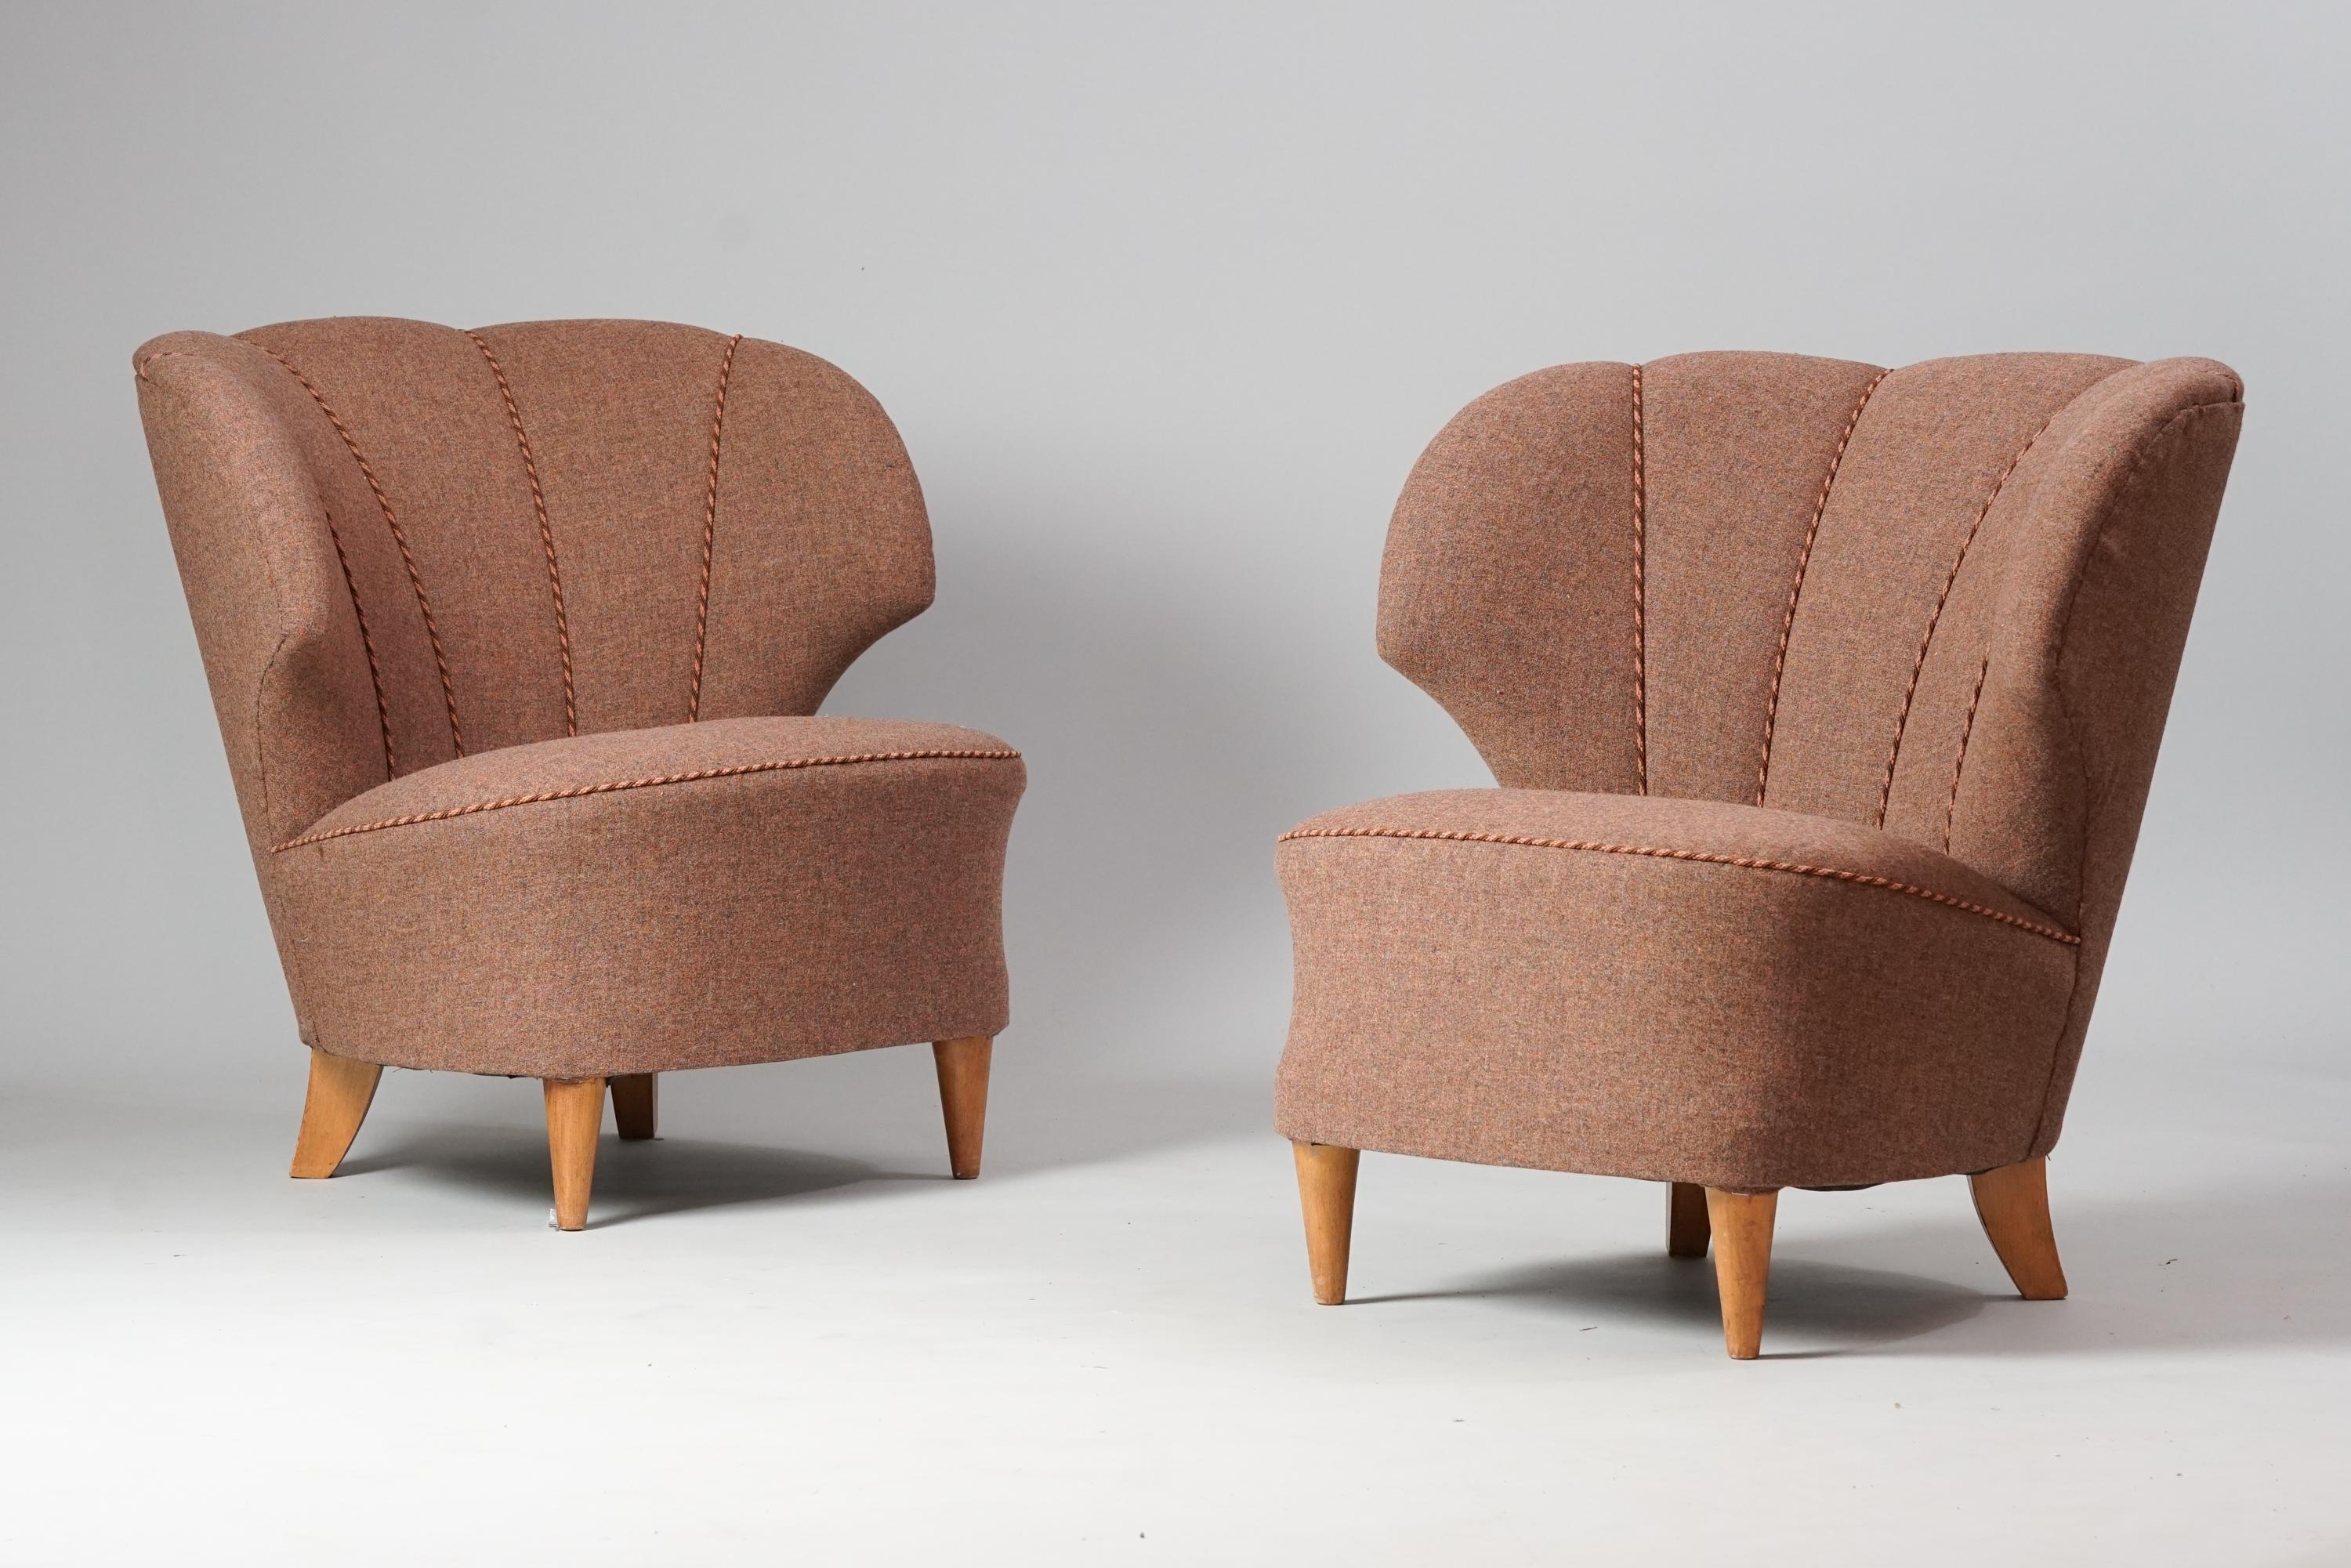 Pair of Carl-Johan Boman armchairs, 1950s. Birch frame, reupholstered woolfabric. Good vintage condition, minor patina consistent with age and use. The armchair are sold as a set. 